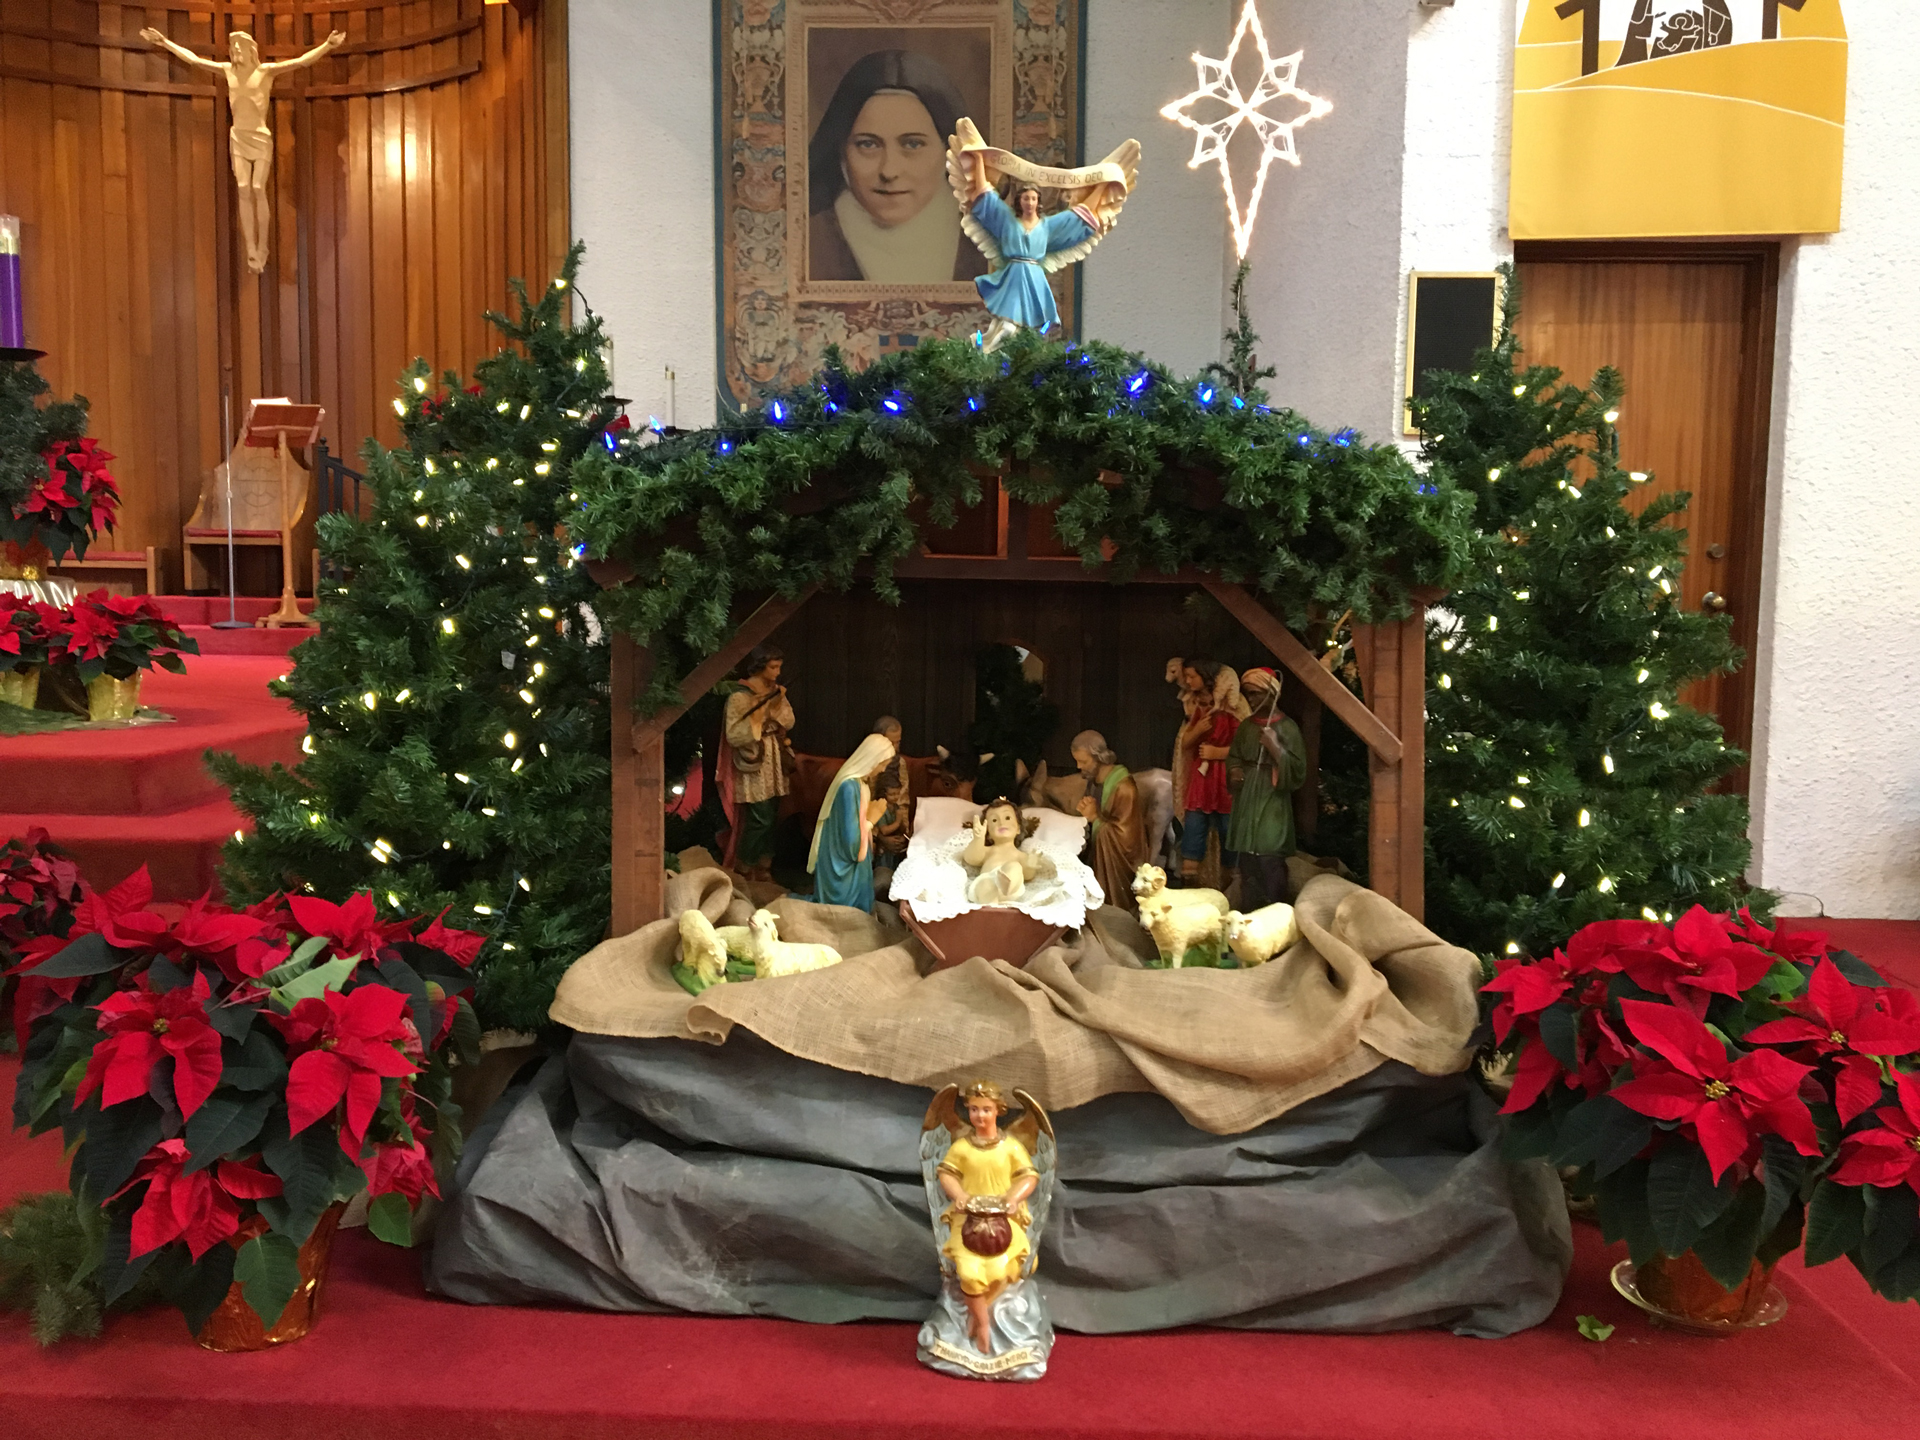 A nativity scene in front of St. Theresa's Parish church altar